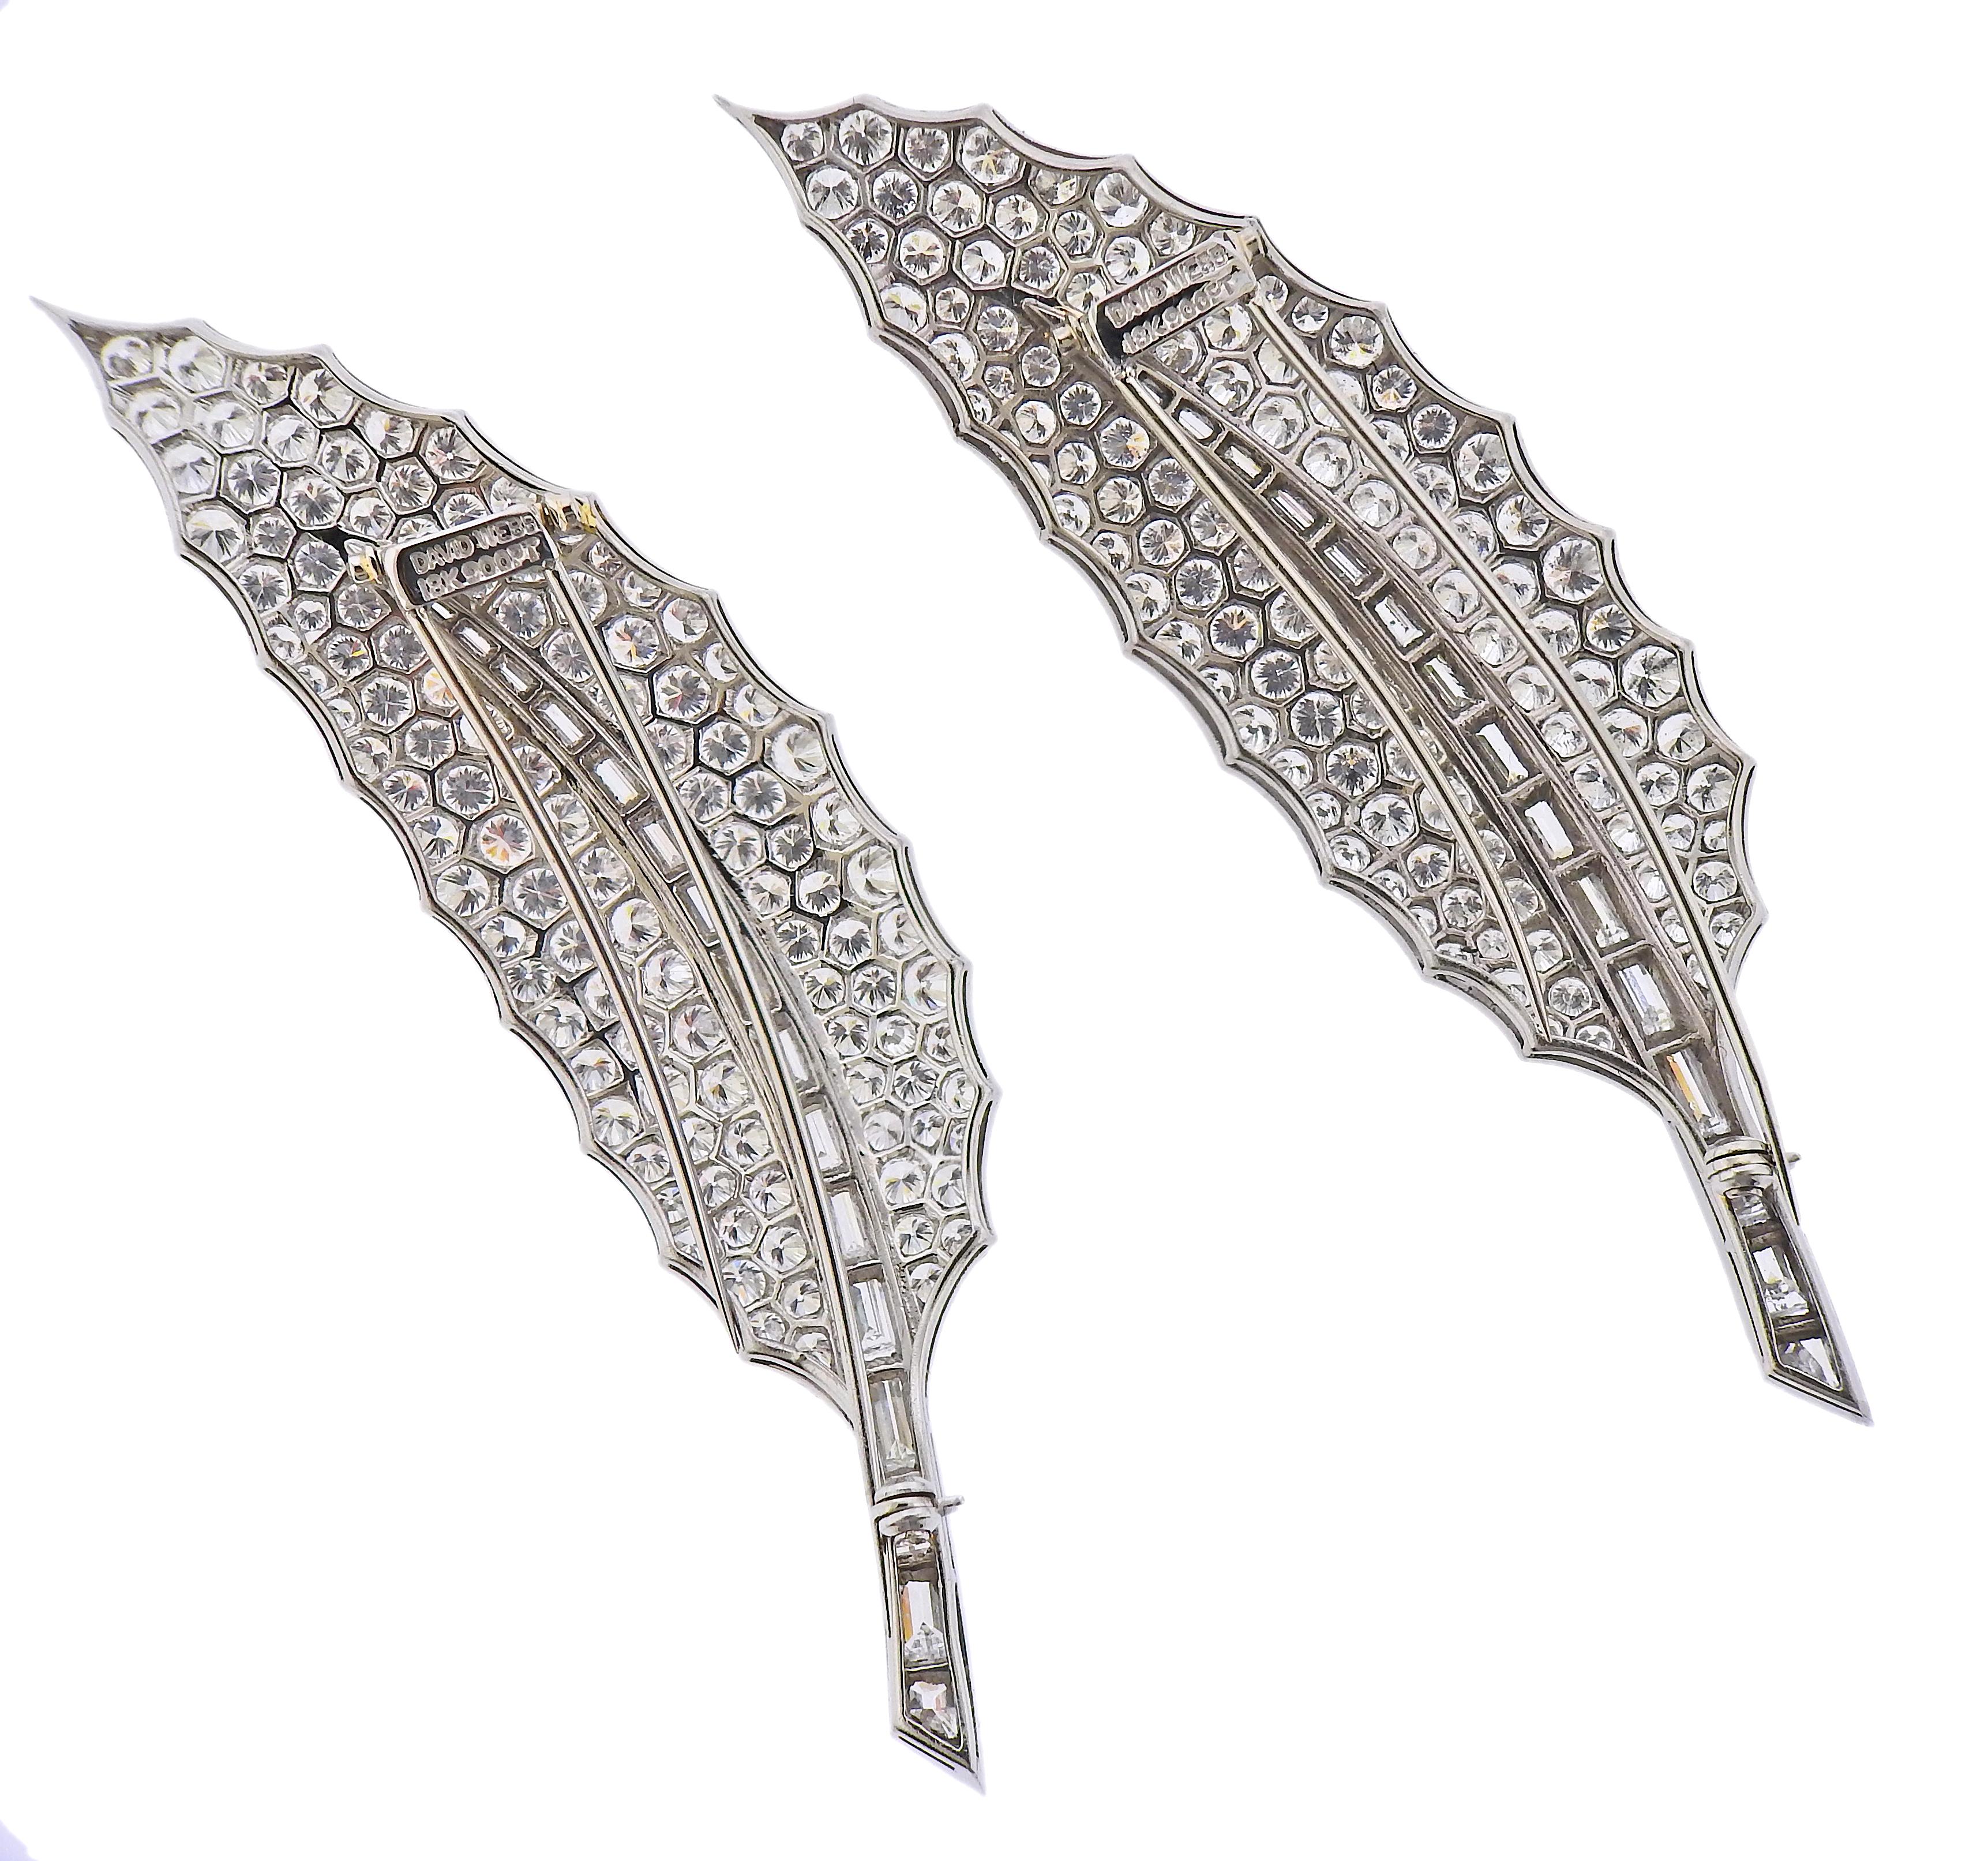 Pair of impressive platinum and 18k gold leaf brooches by David Webb, with a total of approximately 40 carats in round and baguette cut H/VS-SI1 diamonds. Each brooch measures 3 5/8